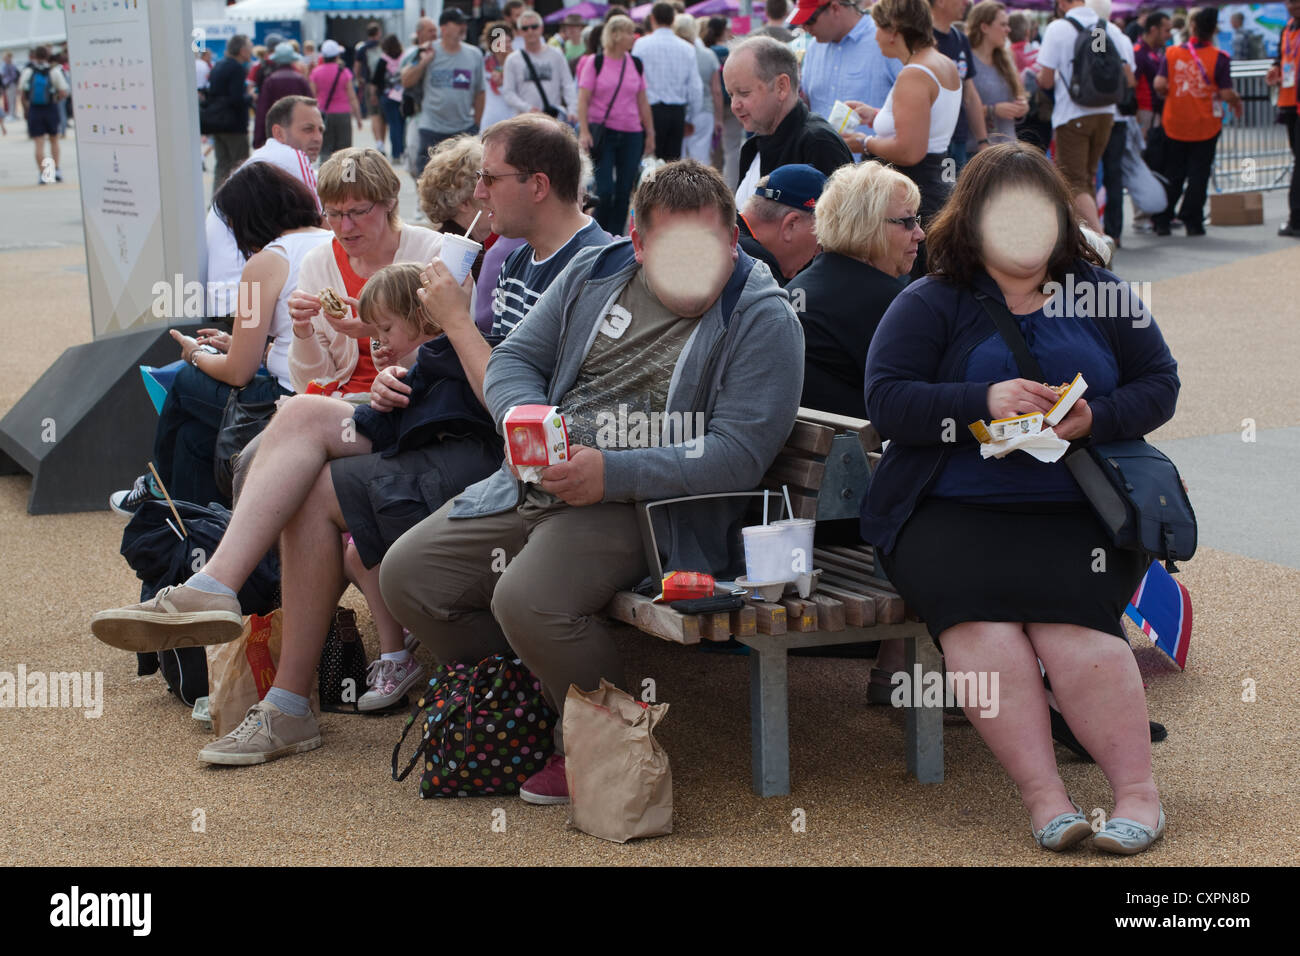 Obese Man and Woman eating Junk Food. London. England. UK. Subjects recognisable faces obscured. Stock Photo